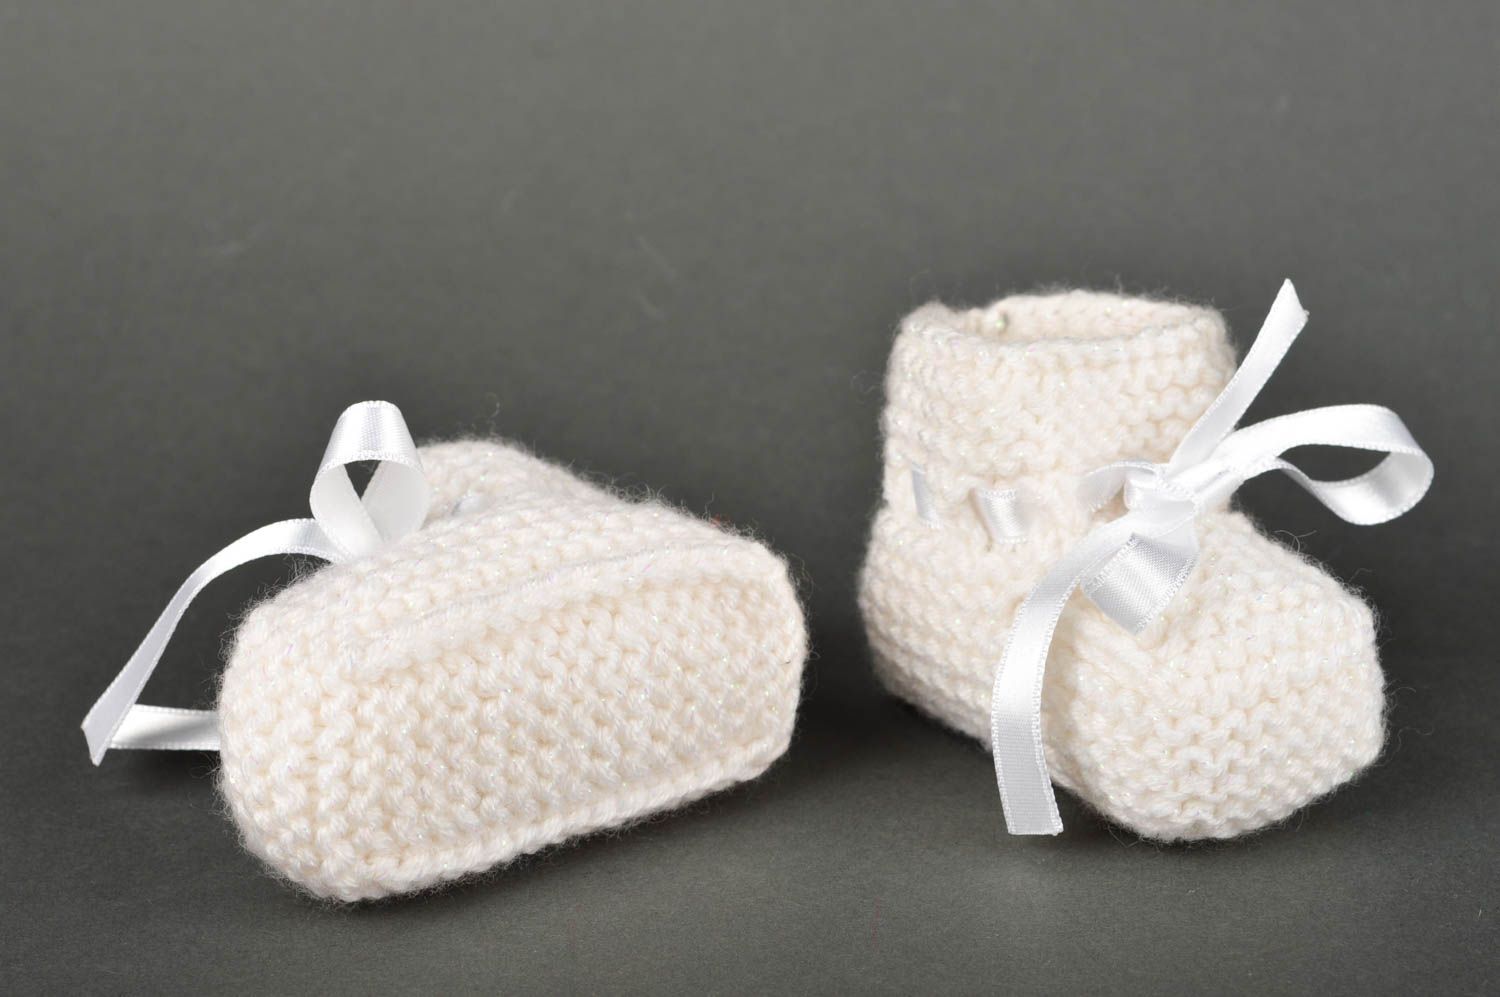 Handmade crocheted baby bootees cute socks for kids warm baby clothes photo 5